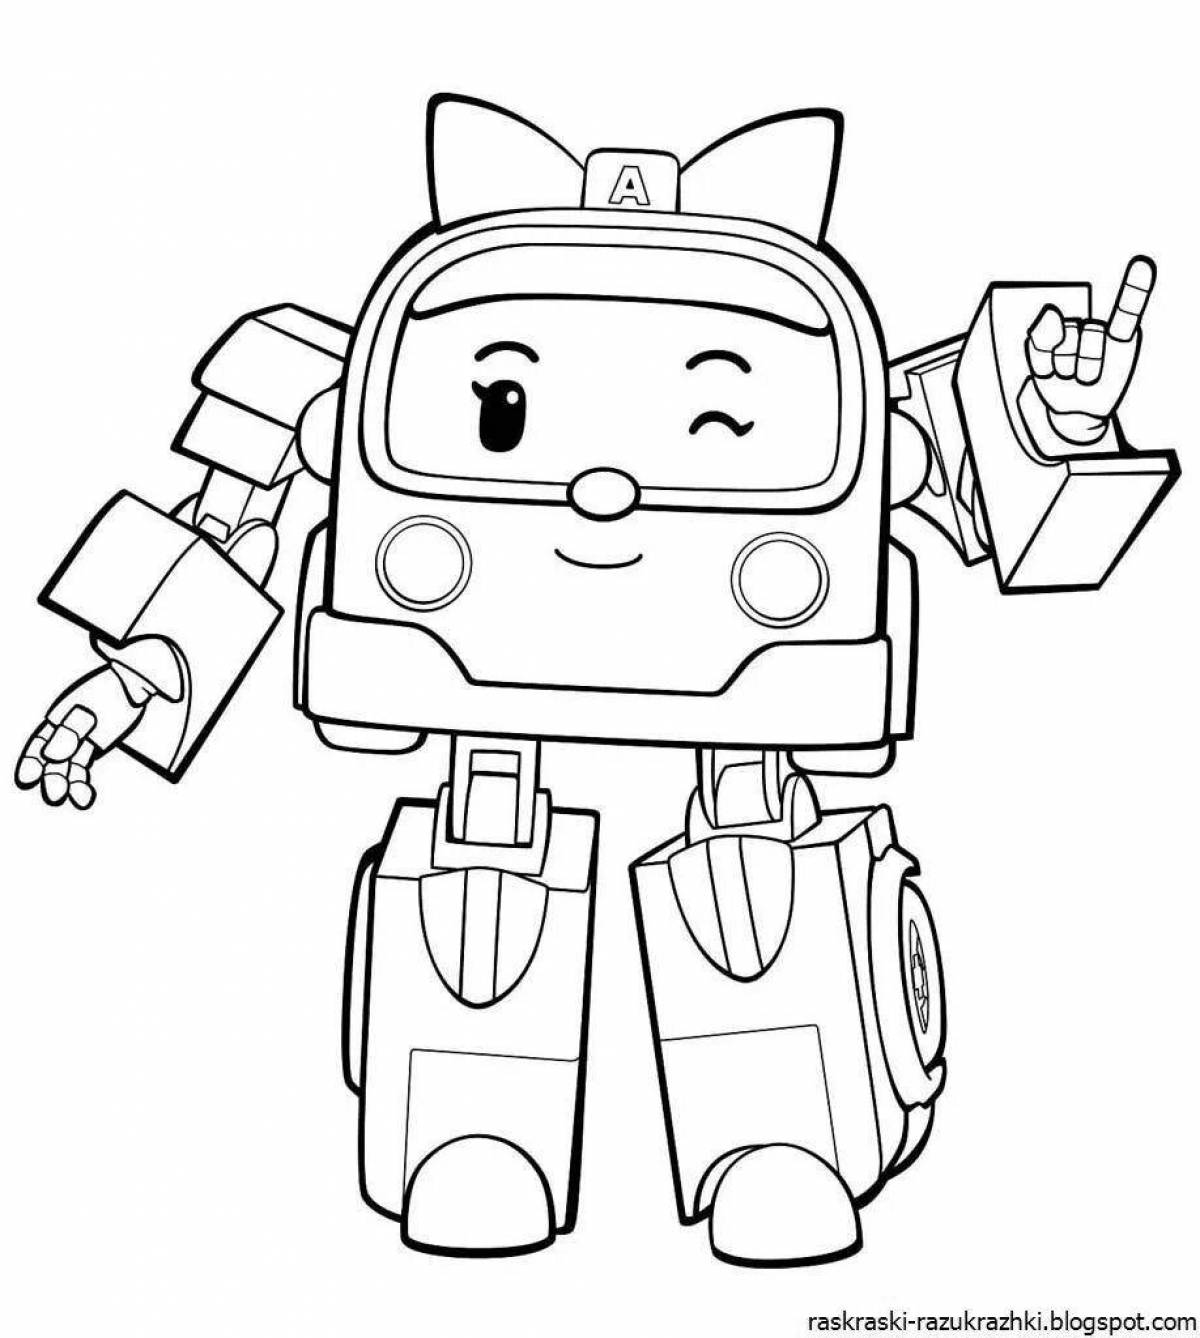 Robocar poly video tempting coloring page